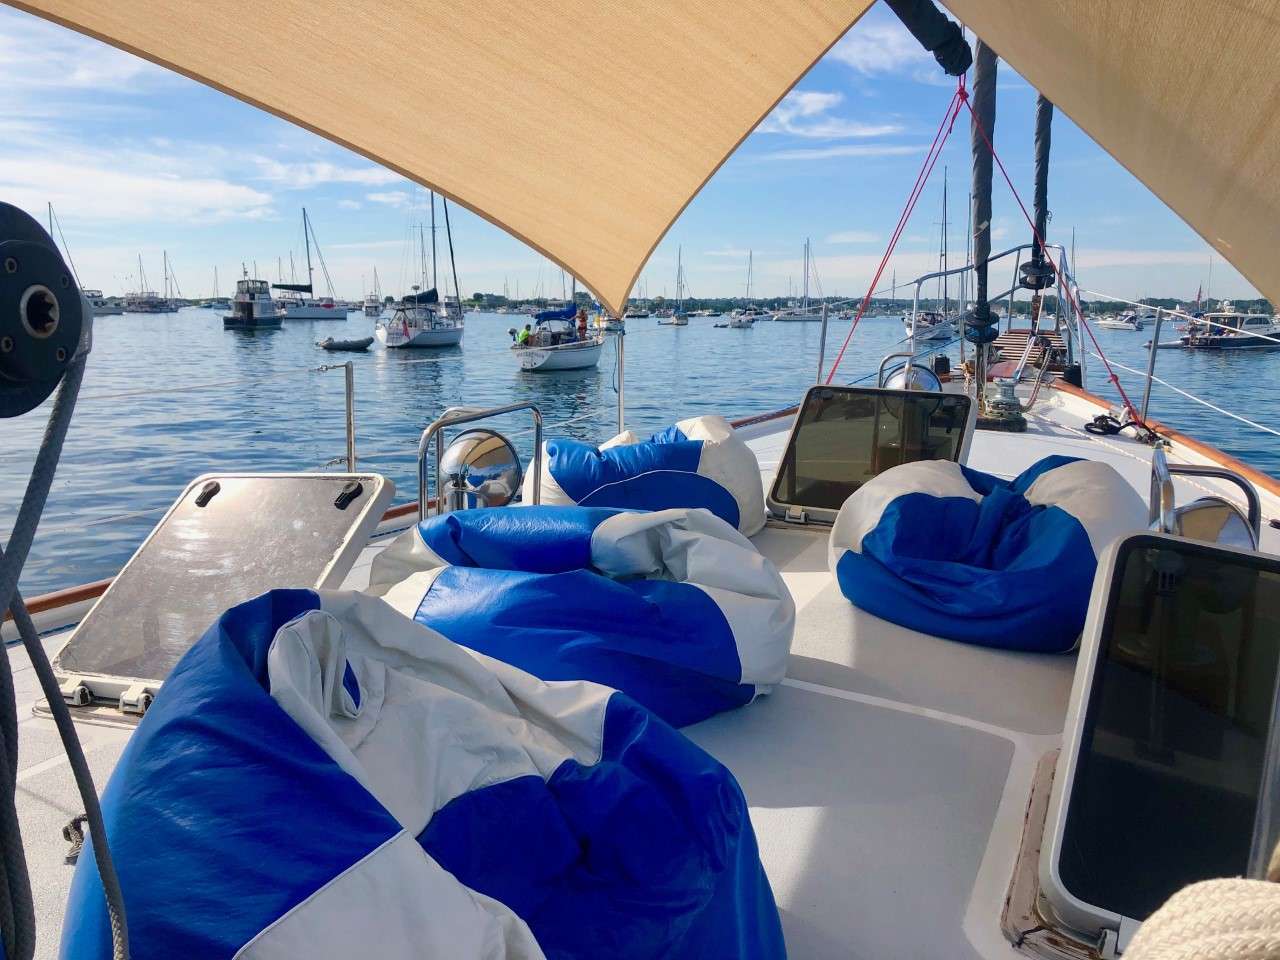 KAI Yacht Charter - Sun shade and bean bags for relaxing